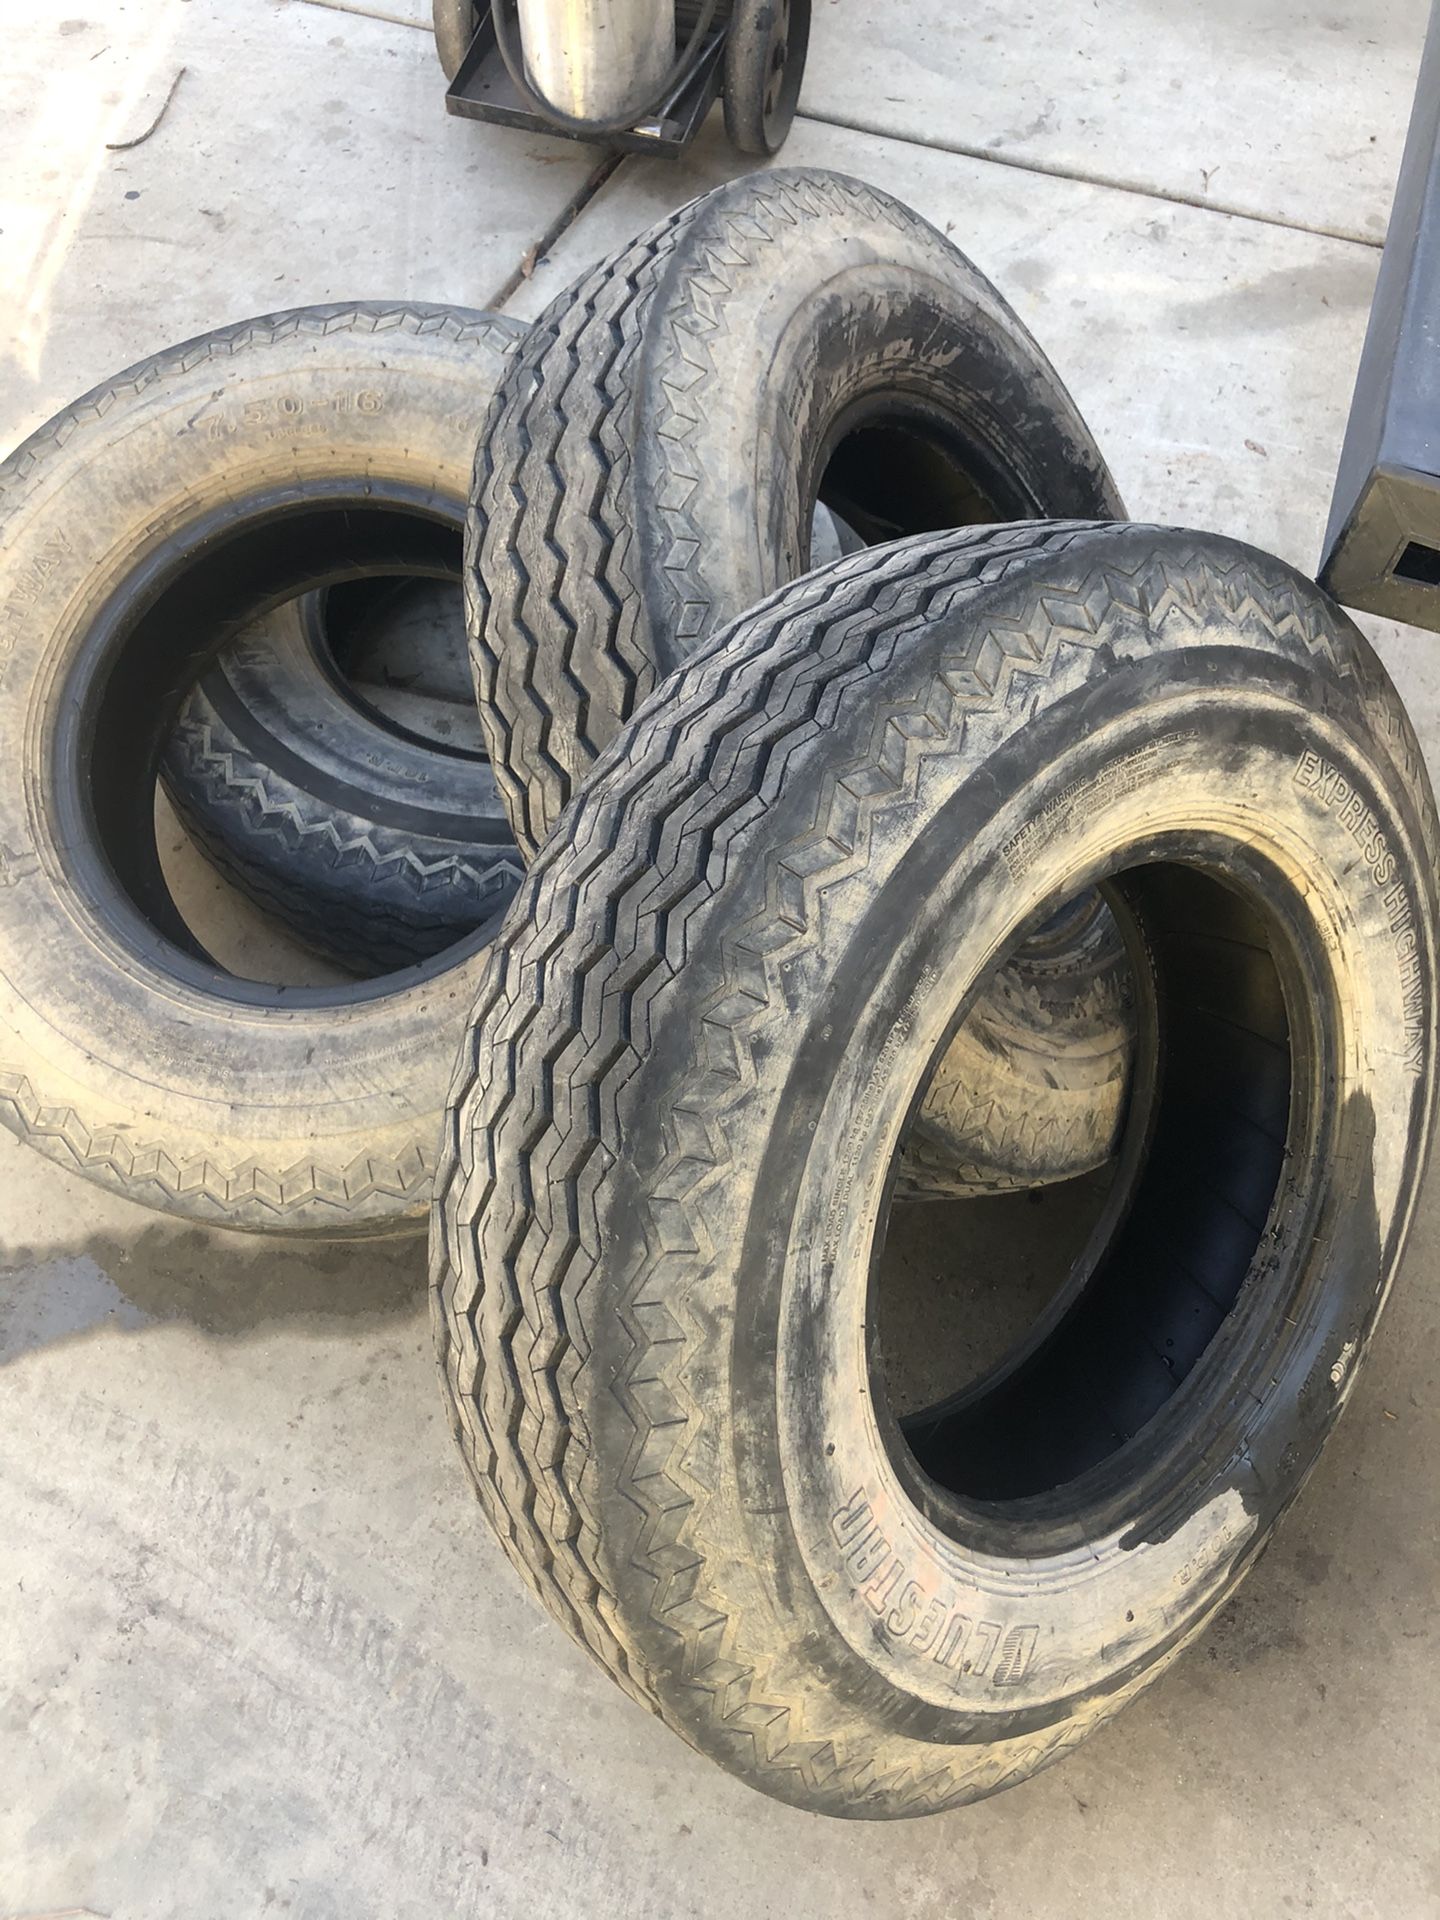 Heavy duty trailer tires for 16” rims 235 80 16 or 7.50-16